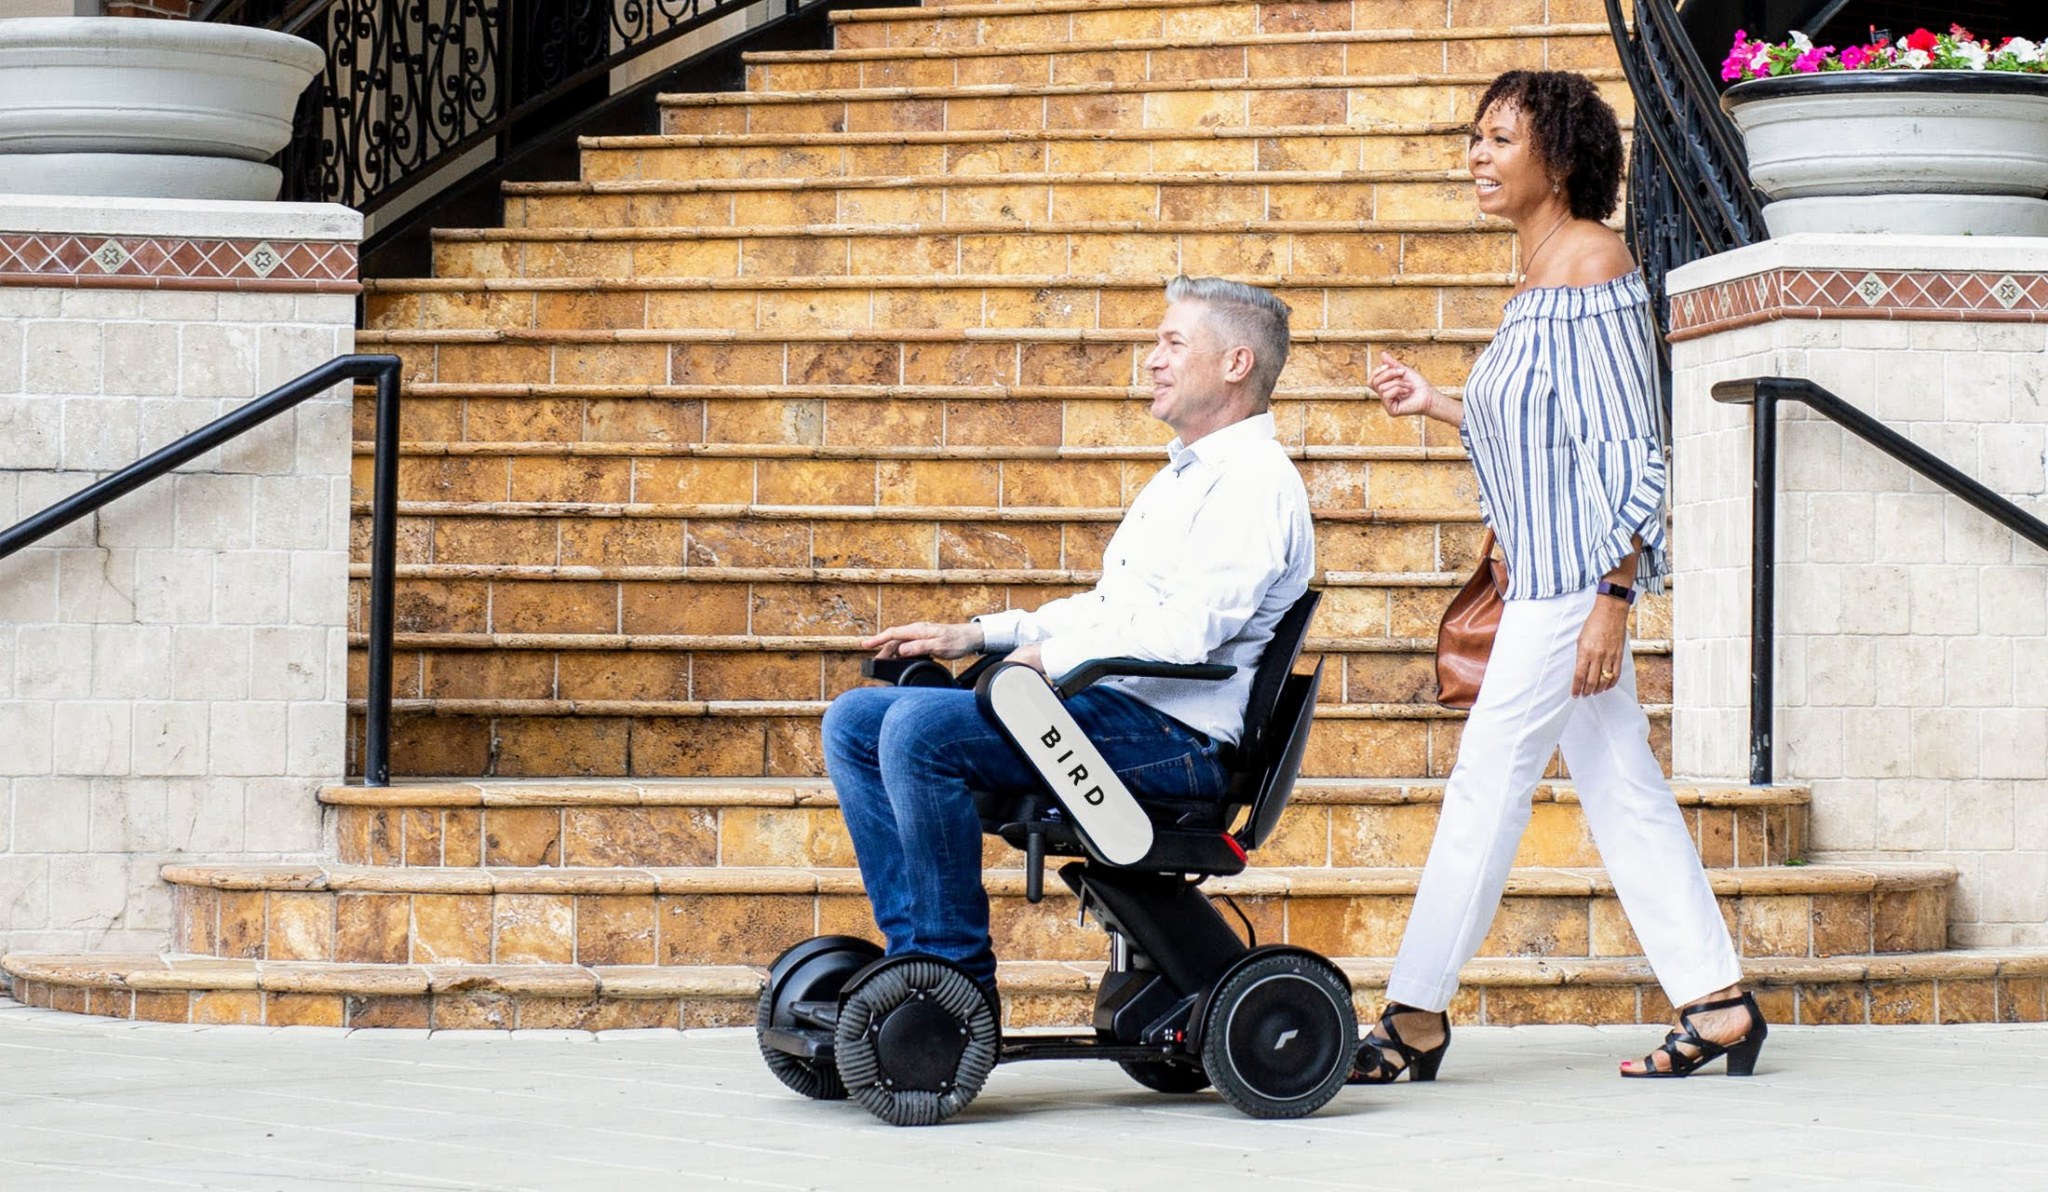 Bird and Scootaround to Offer On-Demand Accessible Mobility for Cities